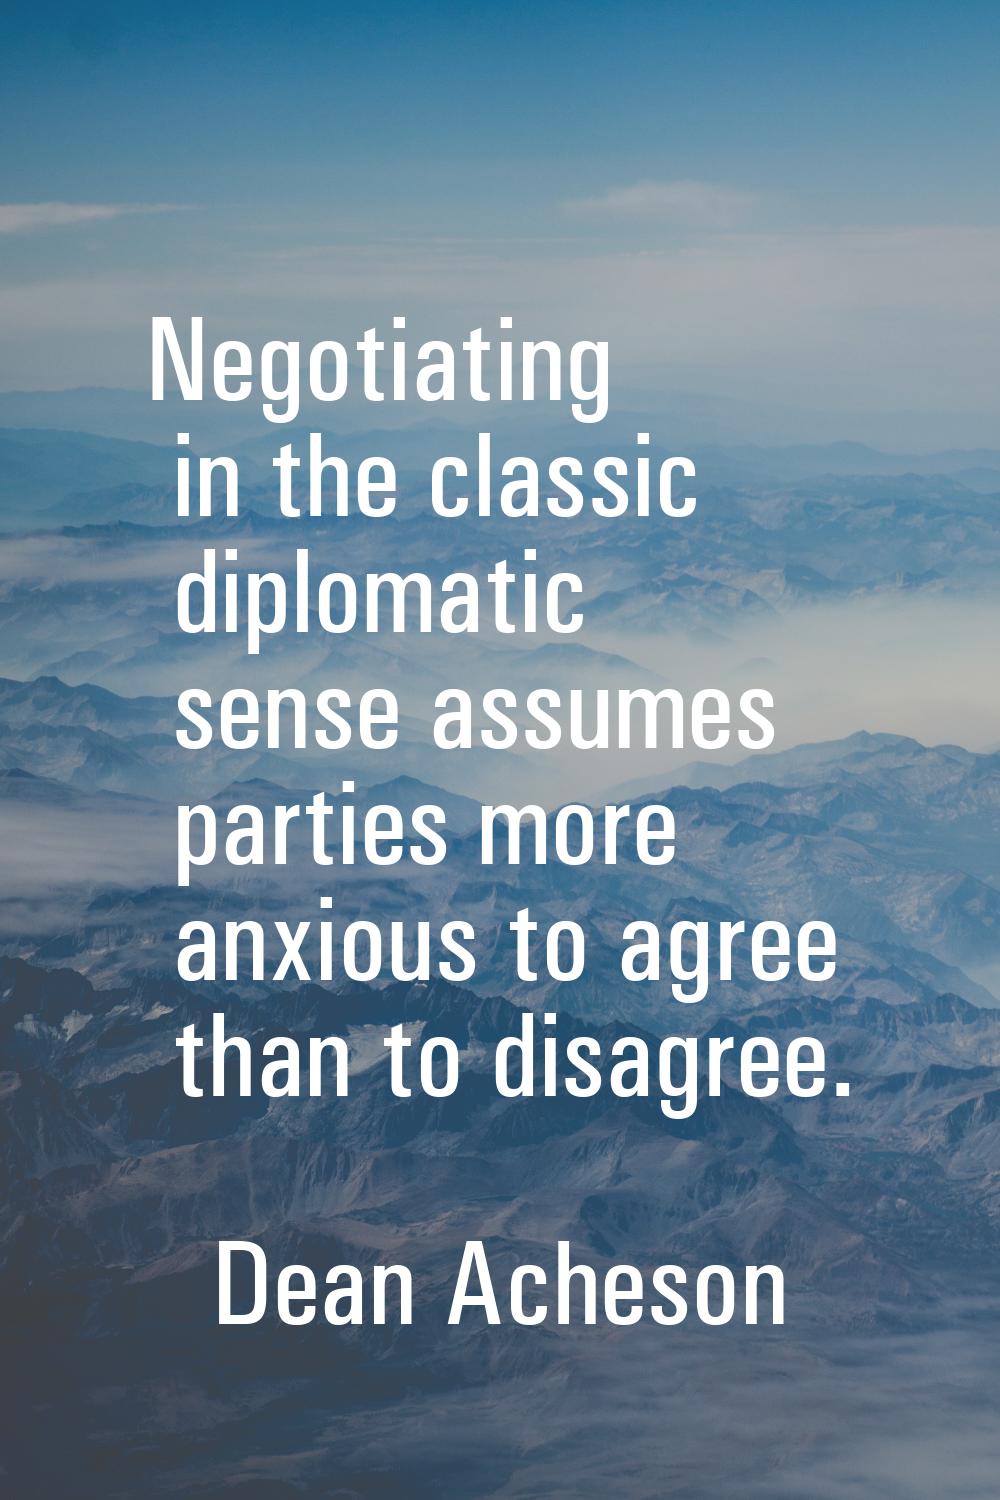 Negotiating in the classic diplomatic sense assumes parties more anxious to agree than to disagree.